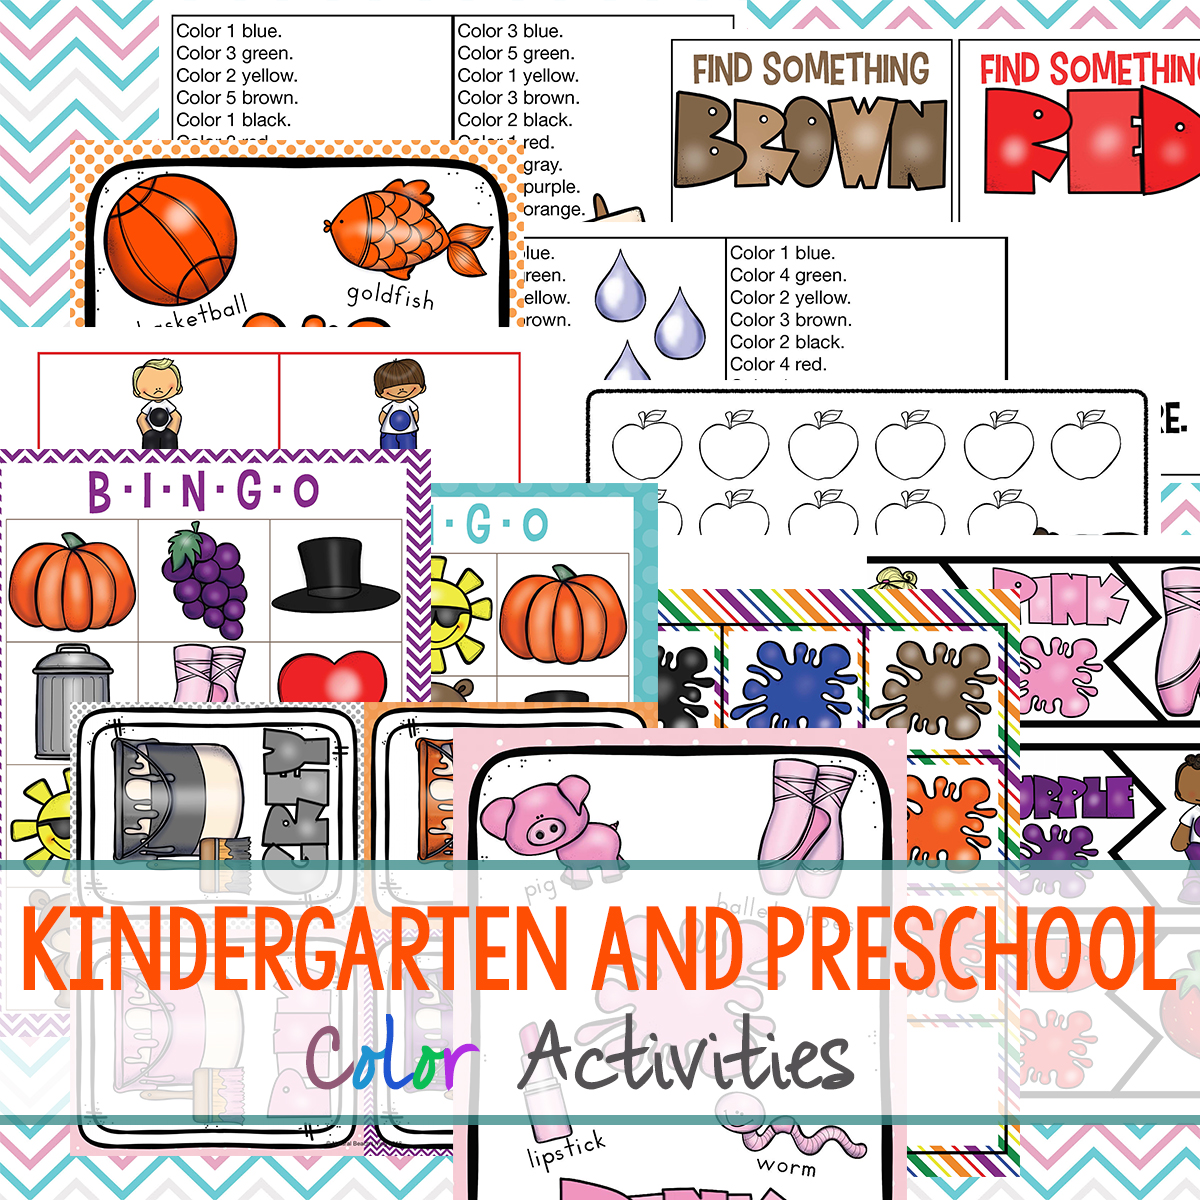 Preschool Color Theme Printables, Lesson Plans and Color theme activities for toddlers, preschool, and kindergarten. These are fun, hands-on activities, and ideas for teaching children how to recognize colors at home or in the classroom. Teaching Colors